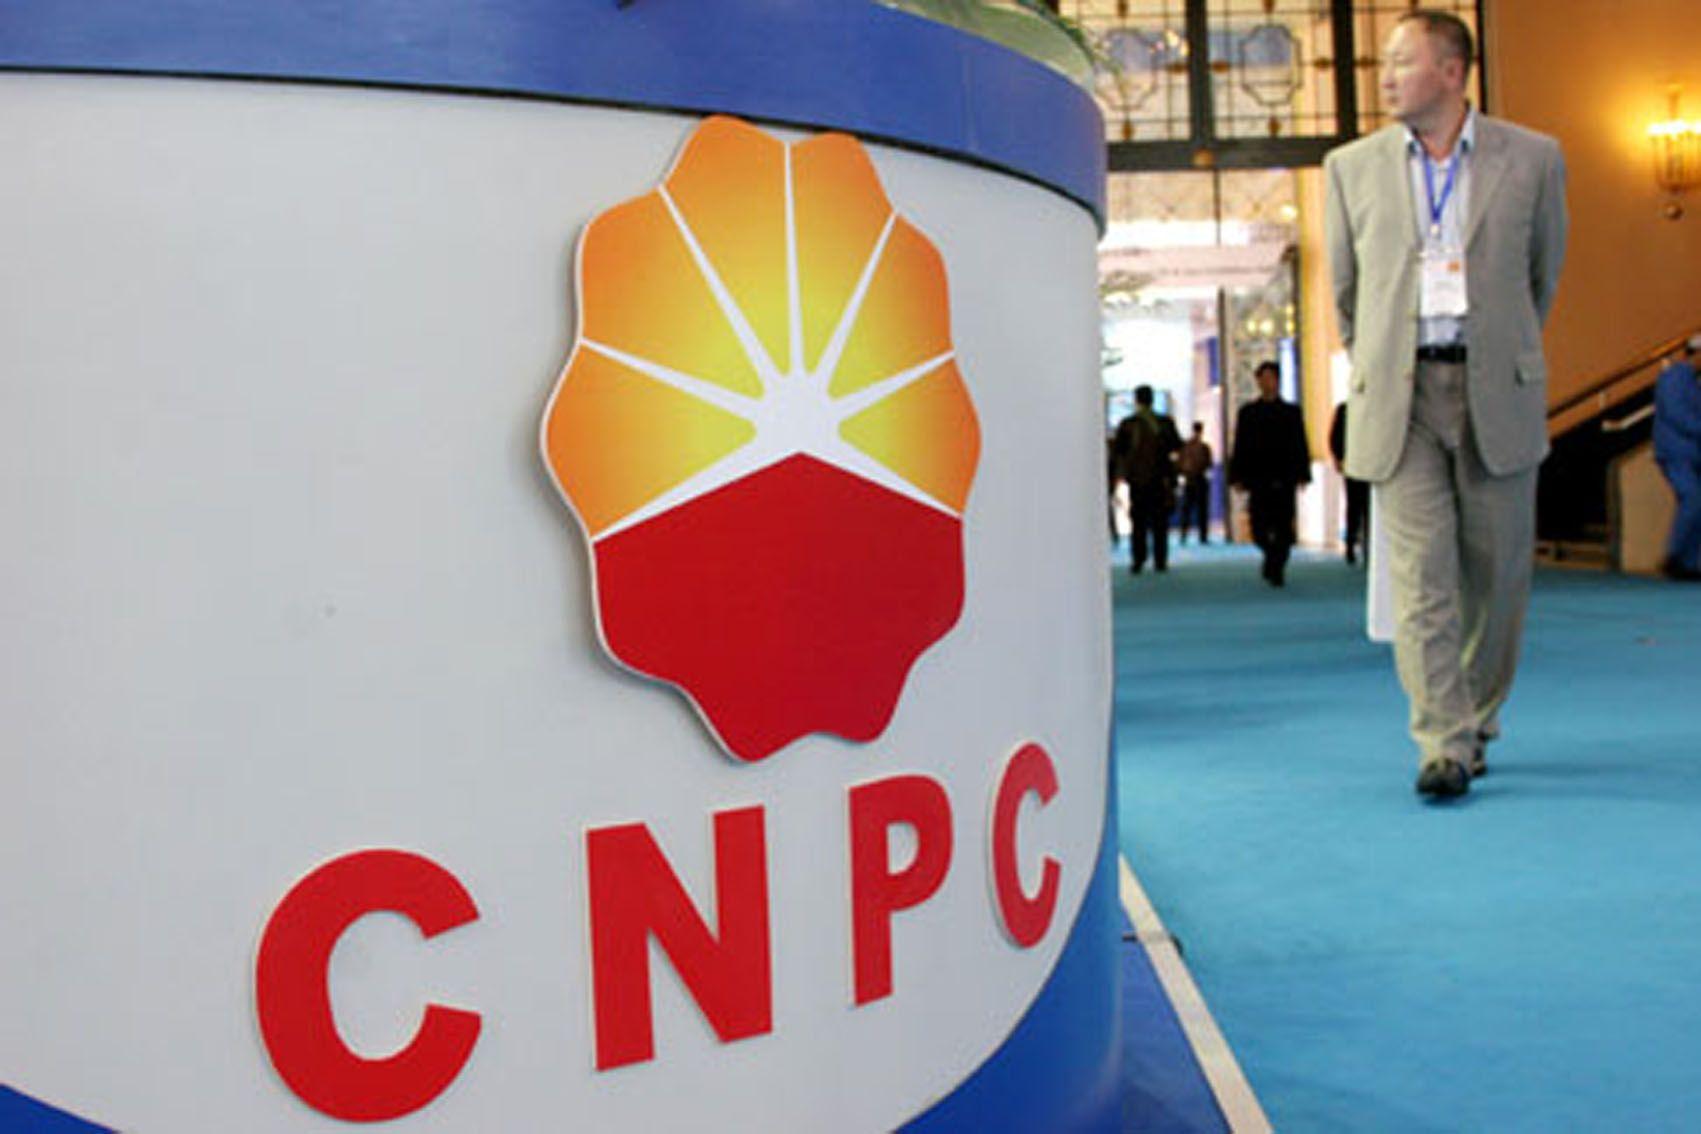 CNPC Logo - China CNPC sees to invest at least $2bn in Peru after Petrobras deal